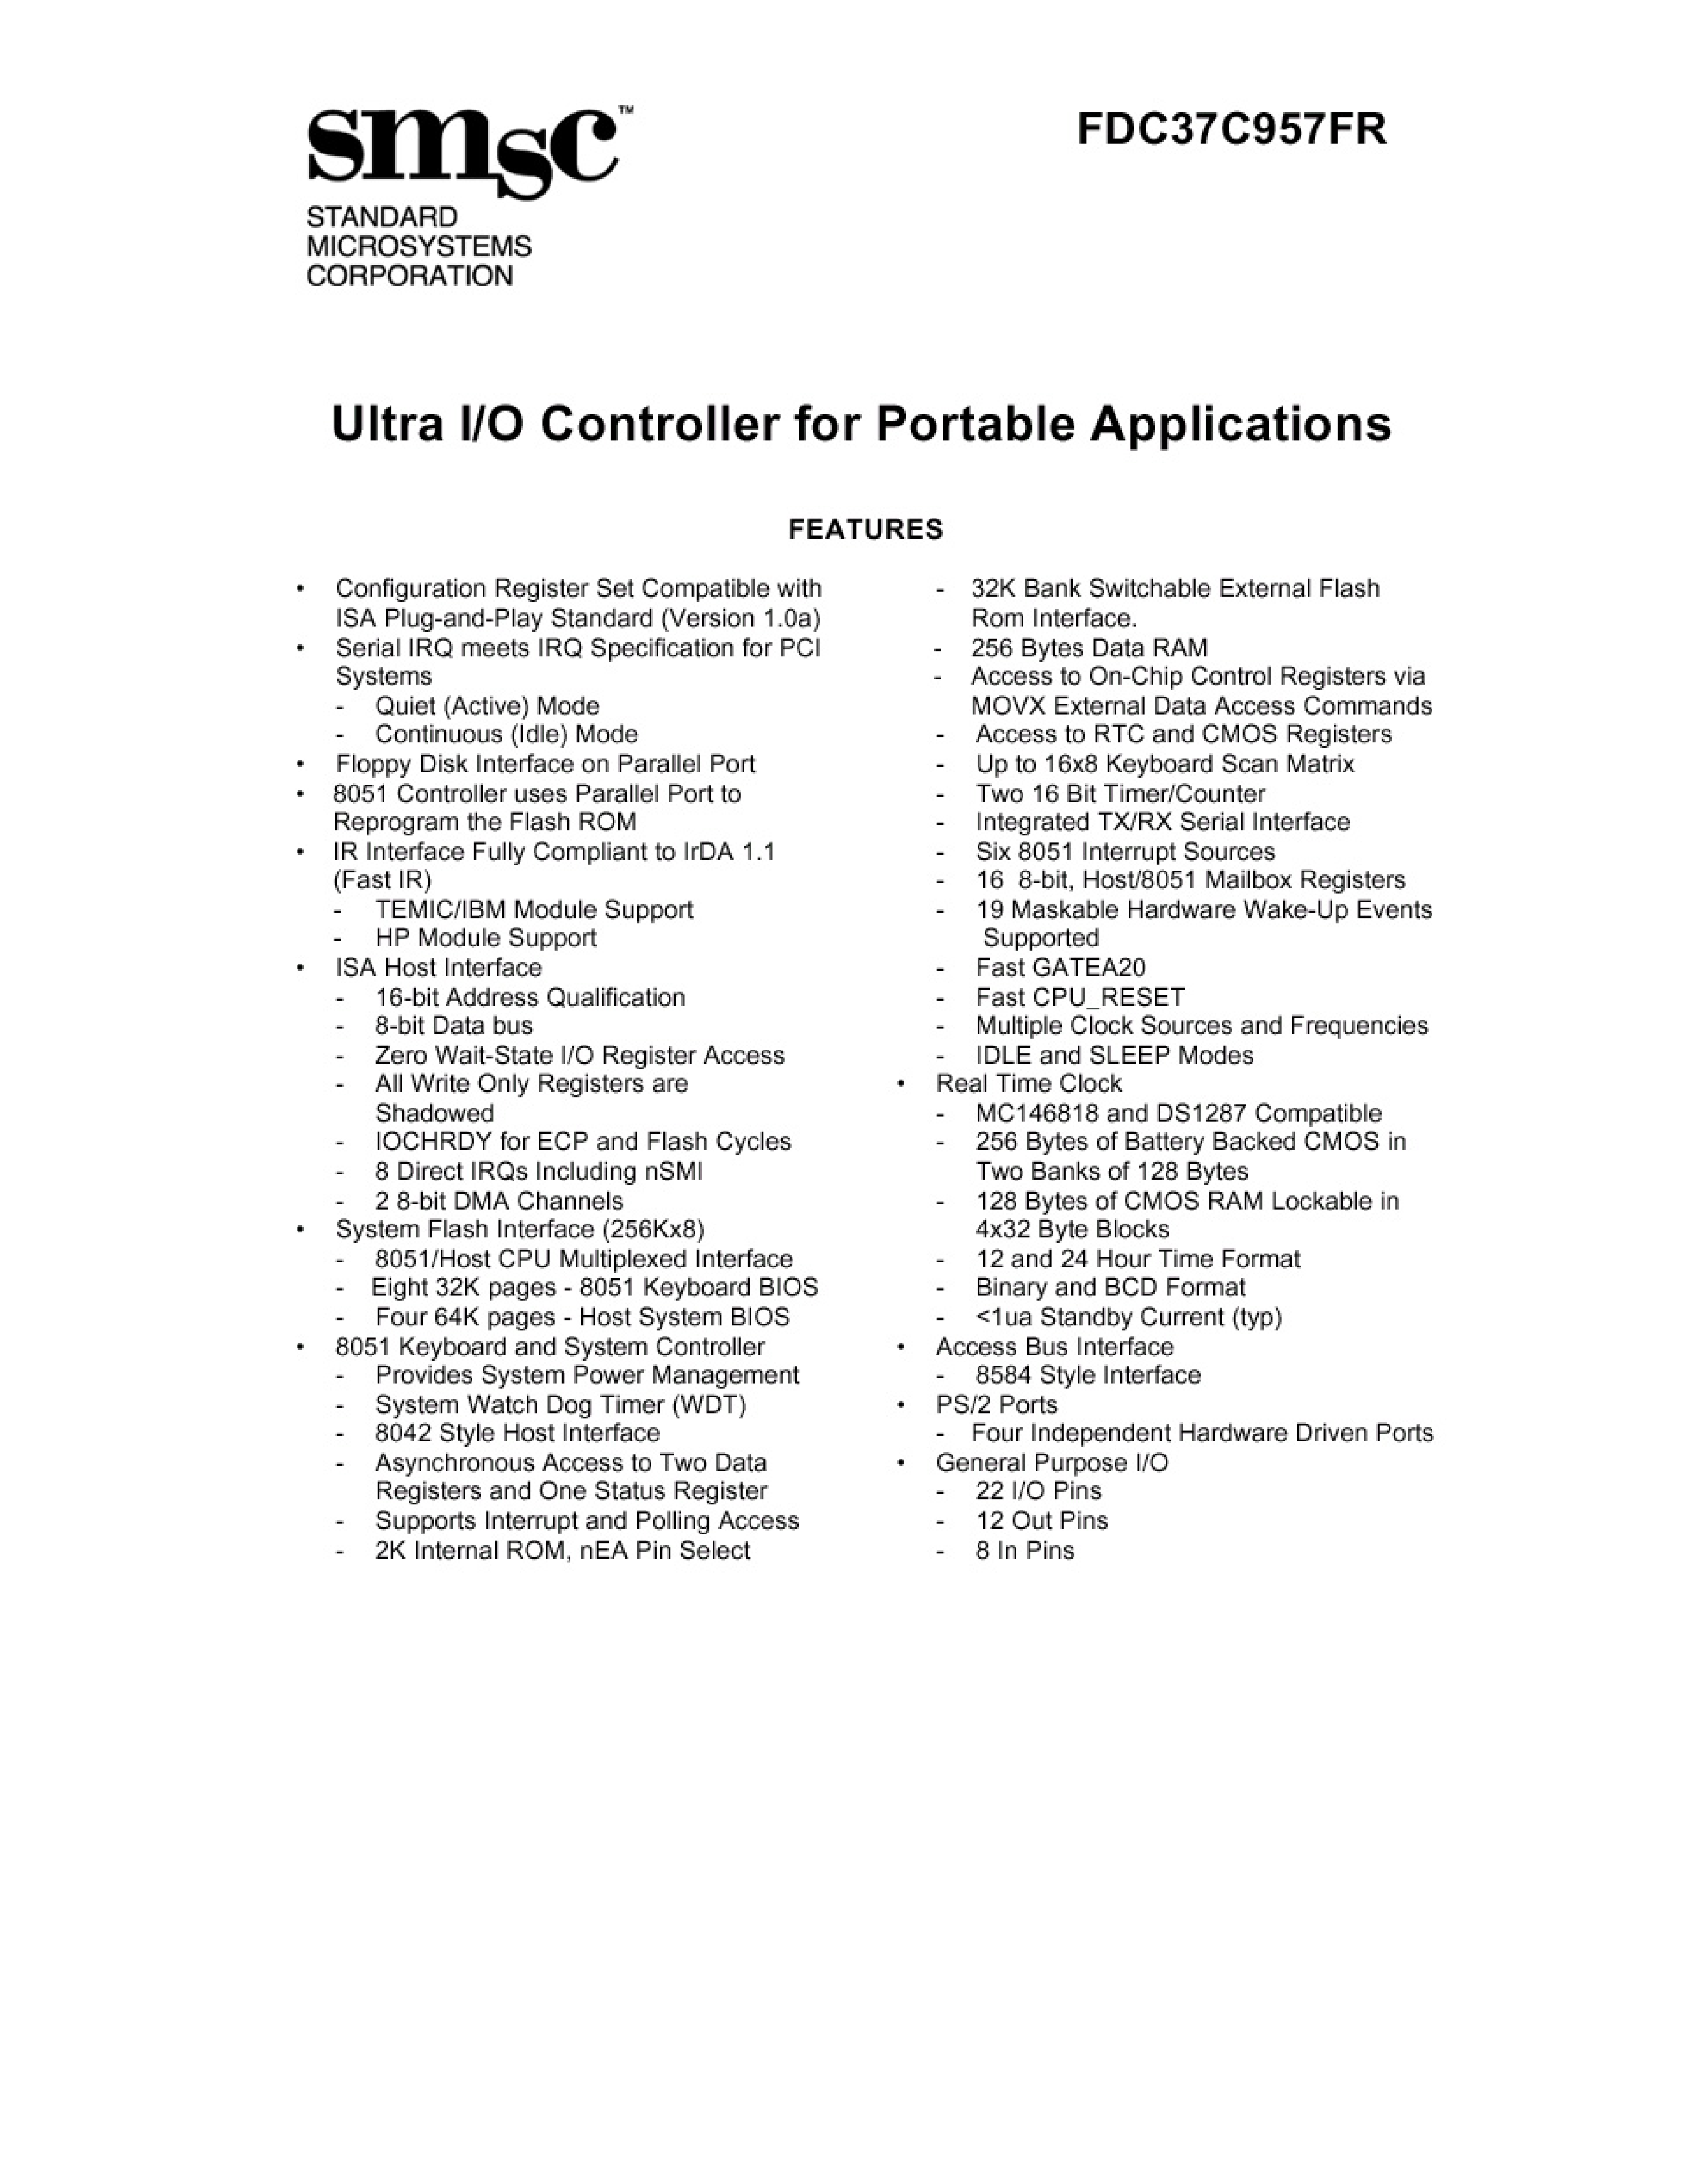 Datasheet 37C957FR - ULTRA I/O CONTROLLER FOR PORTABLE APPLICATIONS page 1